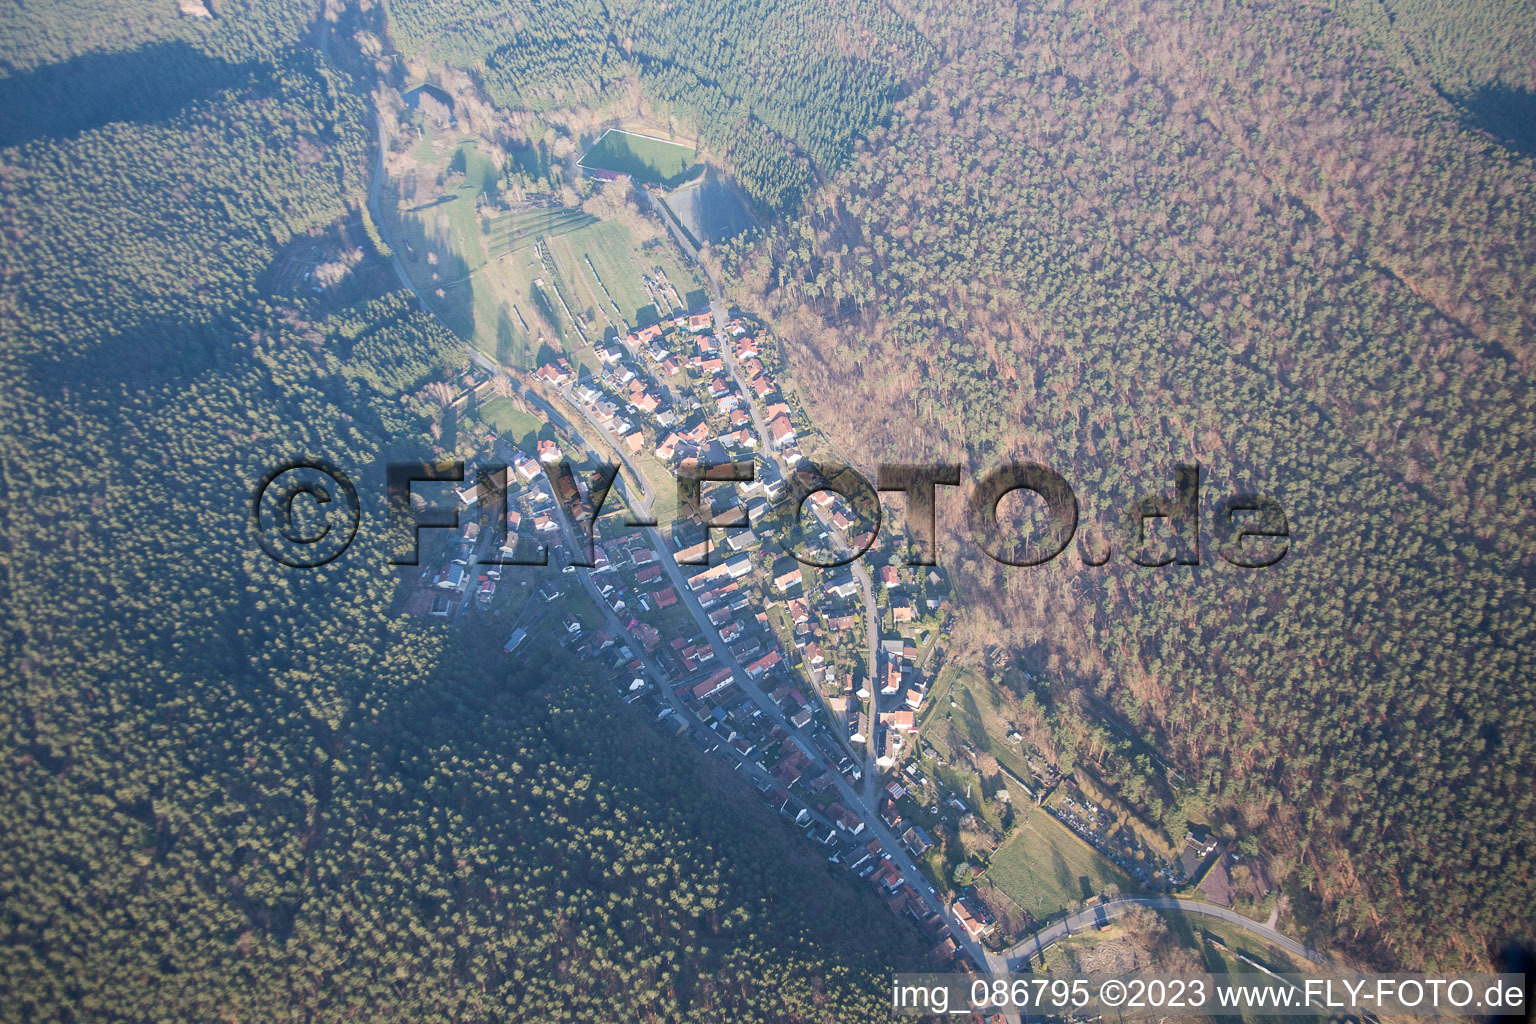 Aerial photograpy of Spirkelbach in the state Rhineland-Palatinate, Germany